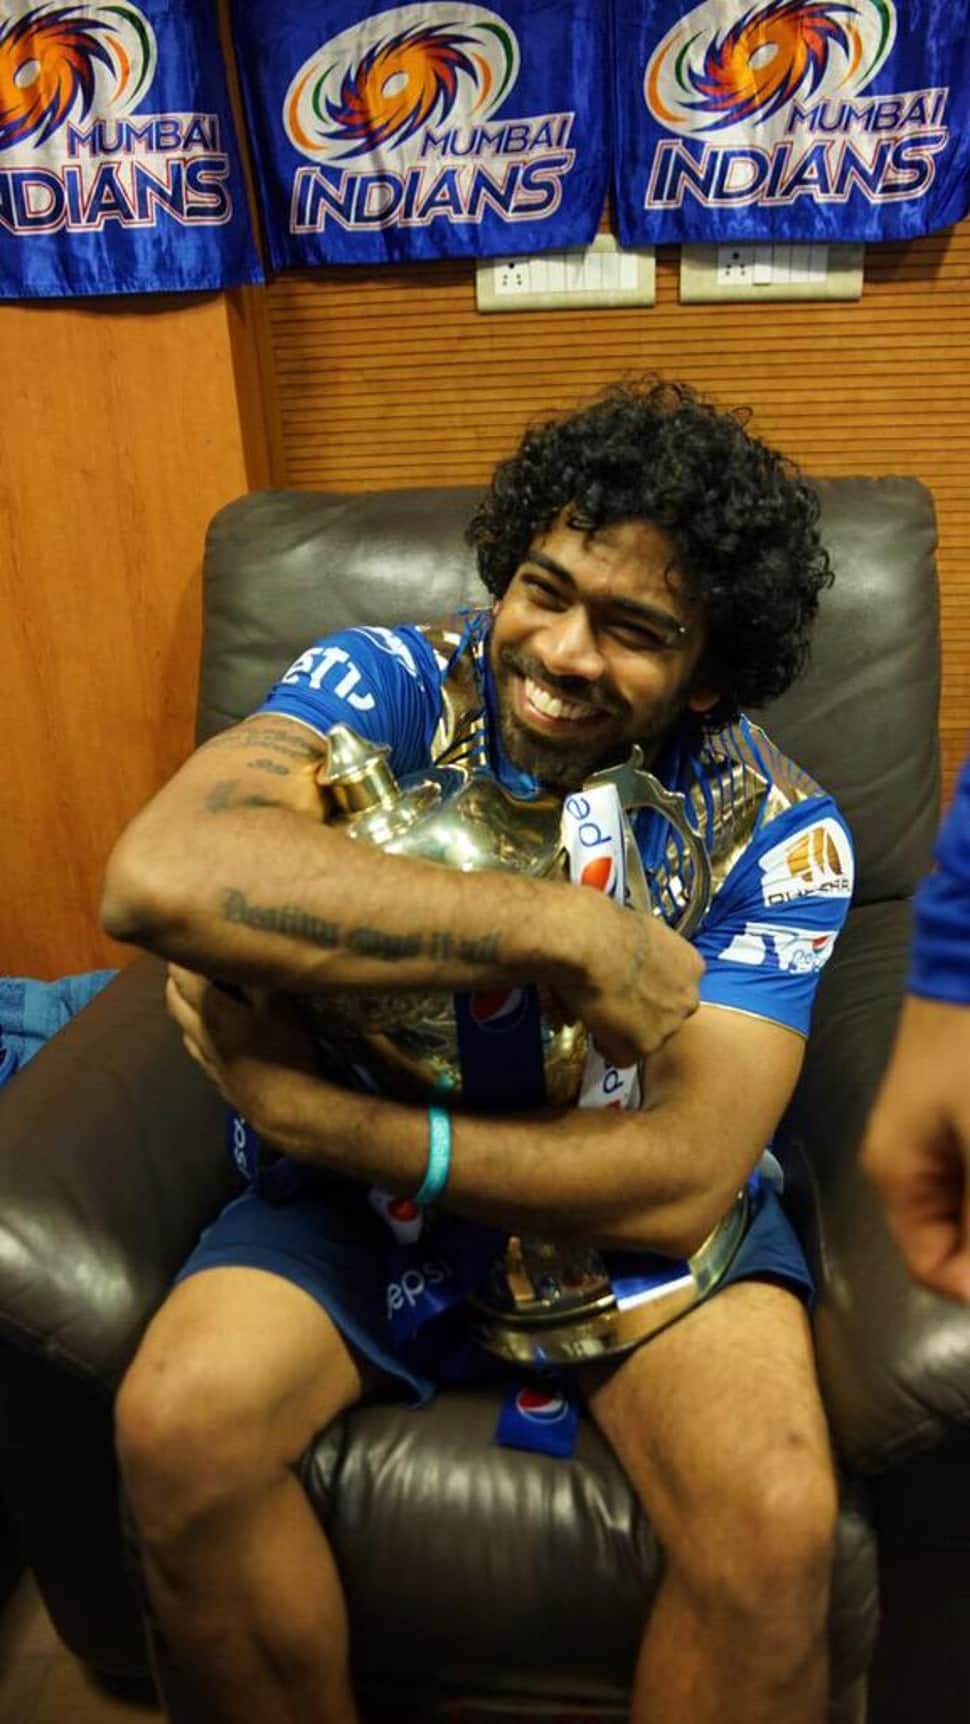 Former Sri Lanka pacer Lasith Malinga and currently Rajasthan Royals and MI New York bowling coach has won 9 T20 titles. Malinga won 2013, 2015, 2017 and 2019 IPL titles with Mumbai Indians, Champions League T20 and has led the Sri Lankan team to a World T20 trophy. (Source: Twitter)